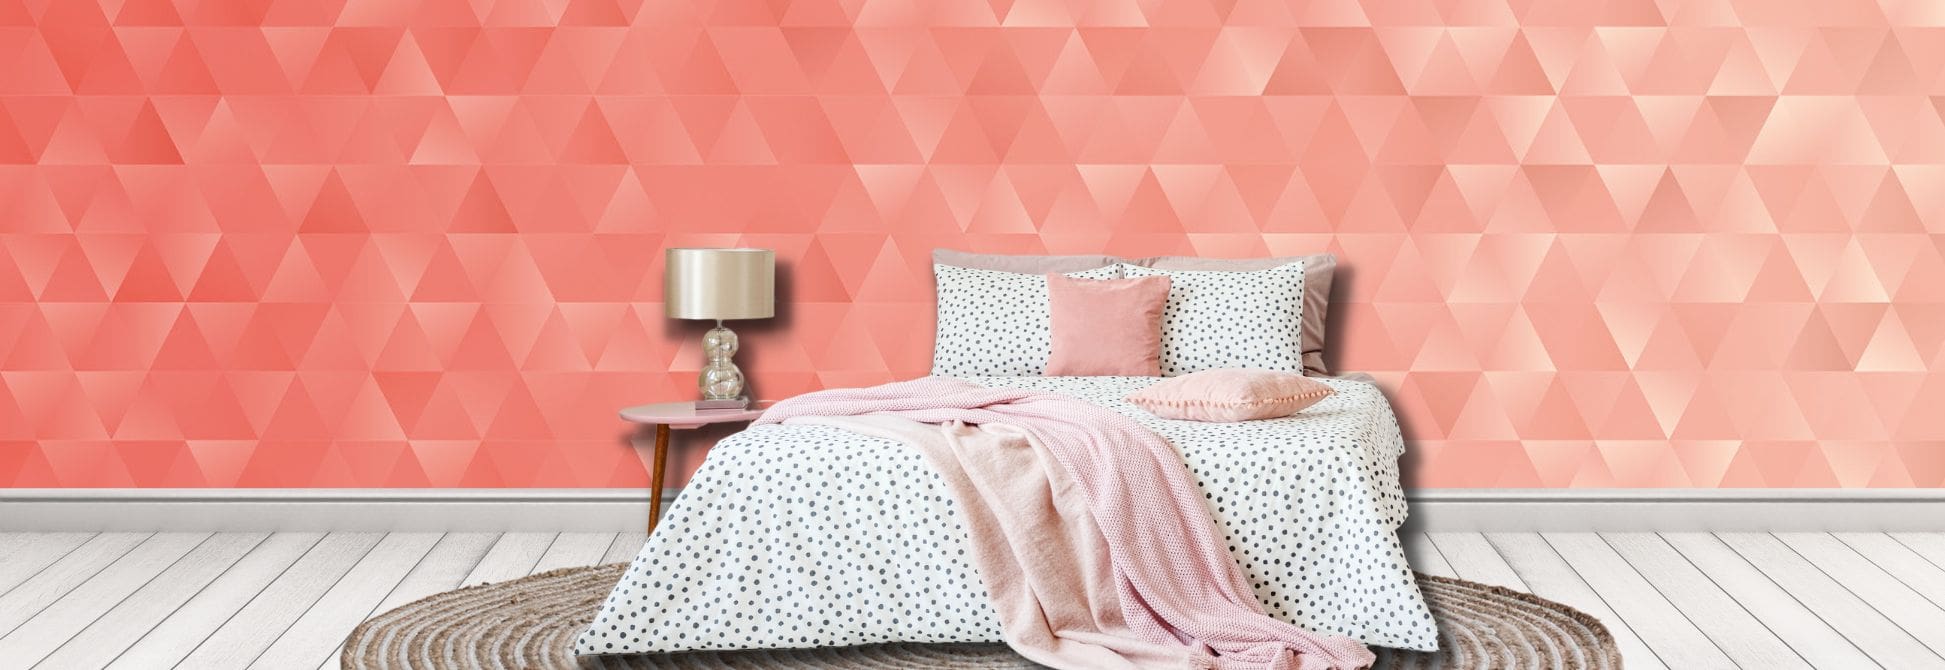 Shop Geometric Wallpaper and Geometric Wall Murals, like this pink triangle wallpaper in a bedroom, from About Murals.